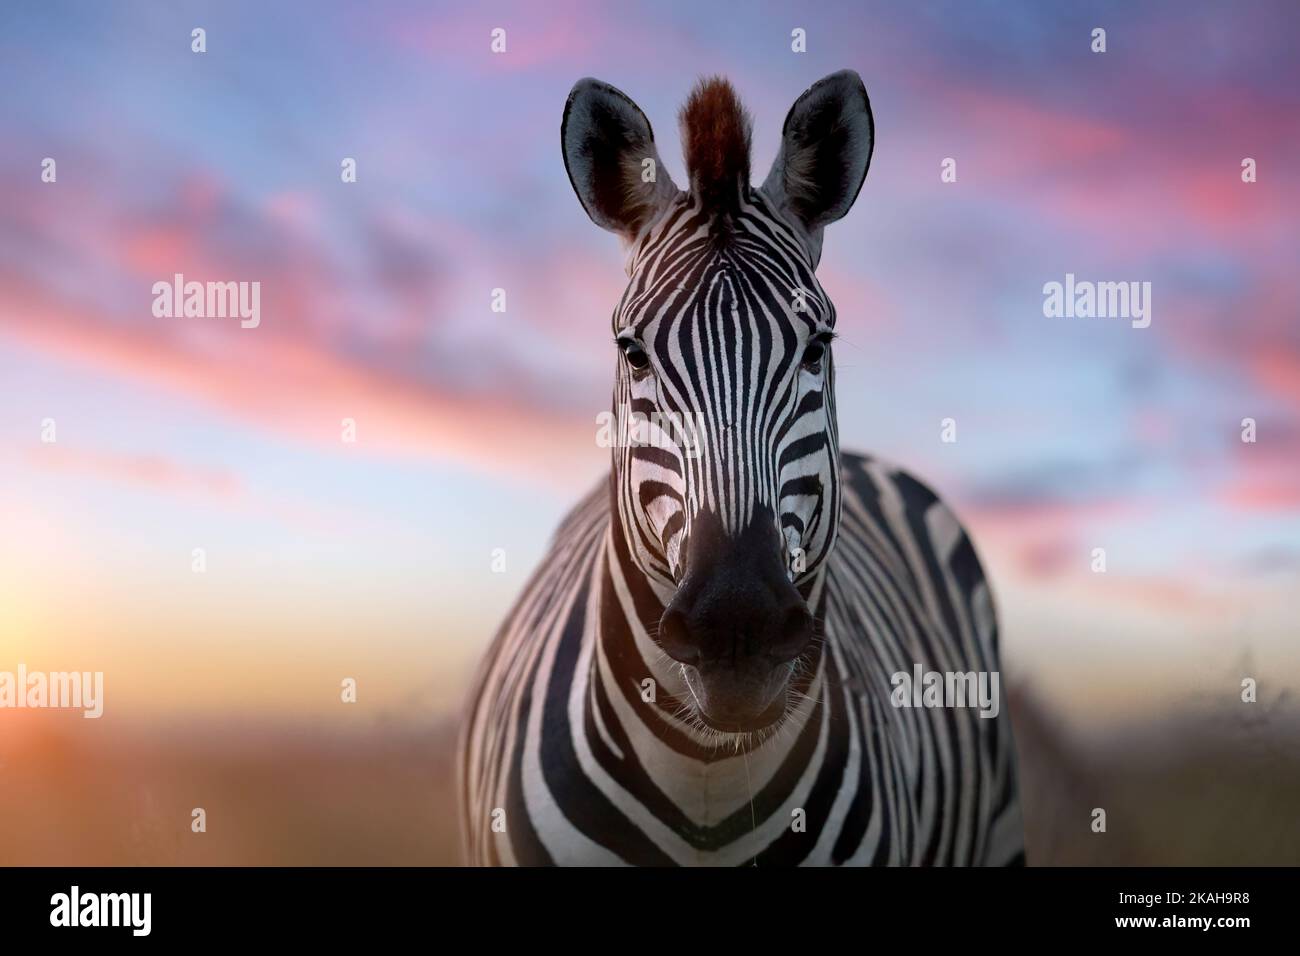 Portrait of a zebra. Close-up of zebra looking directly into the camera, pink-blue sky in the background. Stock Photo